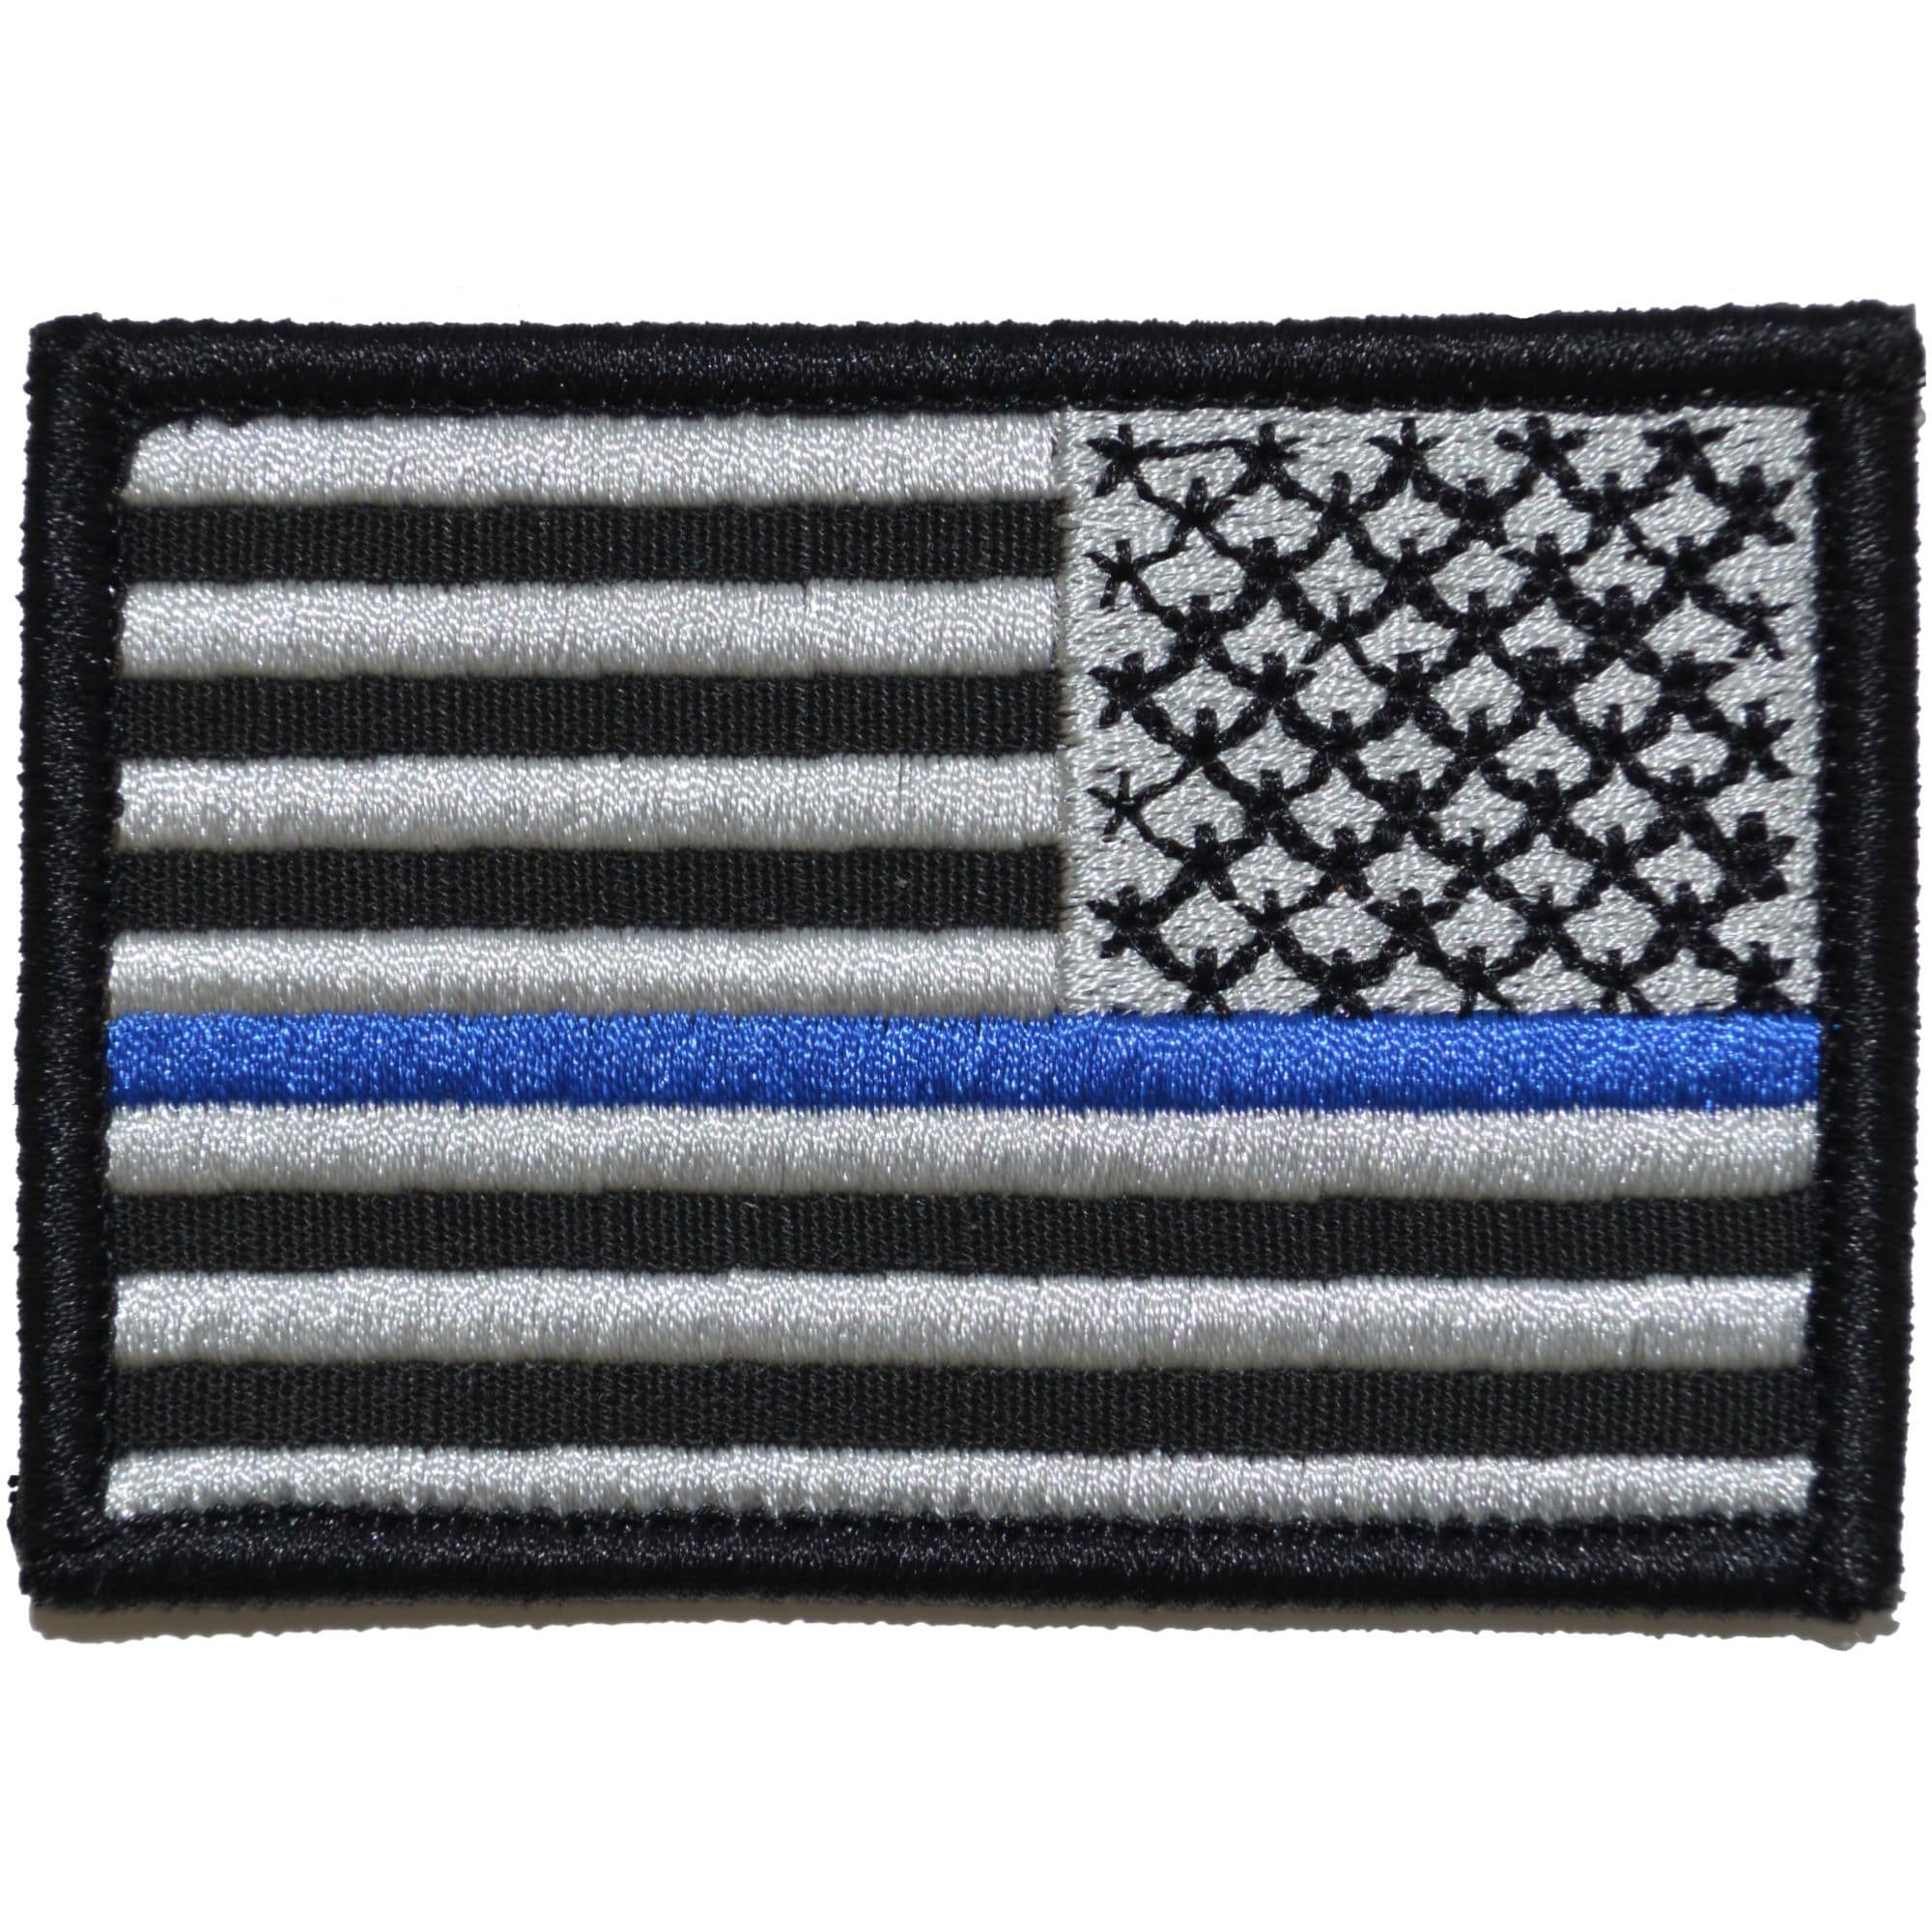 Tactical Gear Junkie Patches Black Reverse Thin Blue Line Police USA Flag - 2x3 Patch